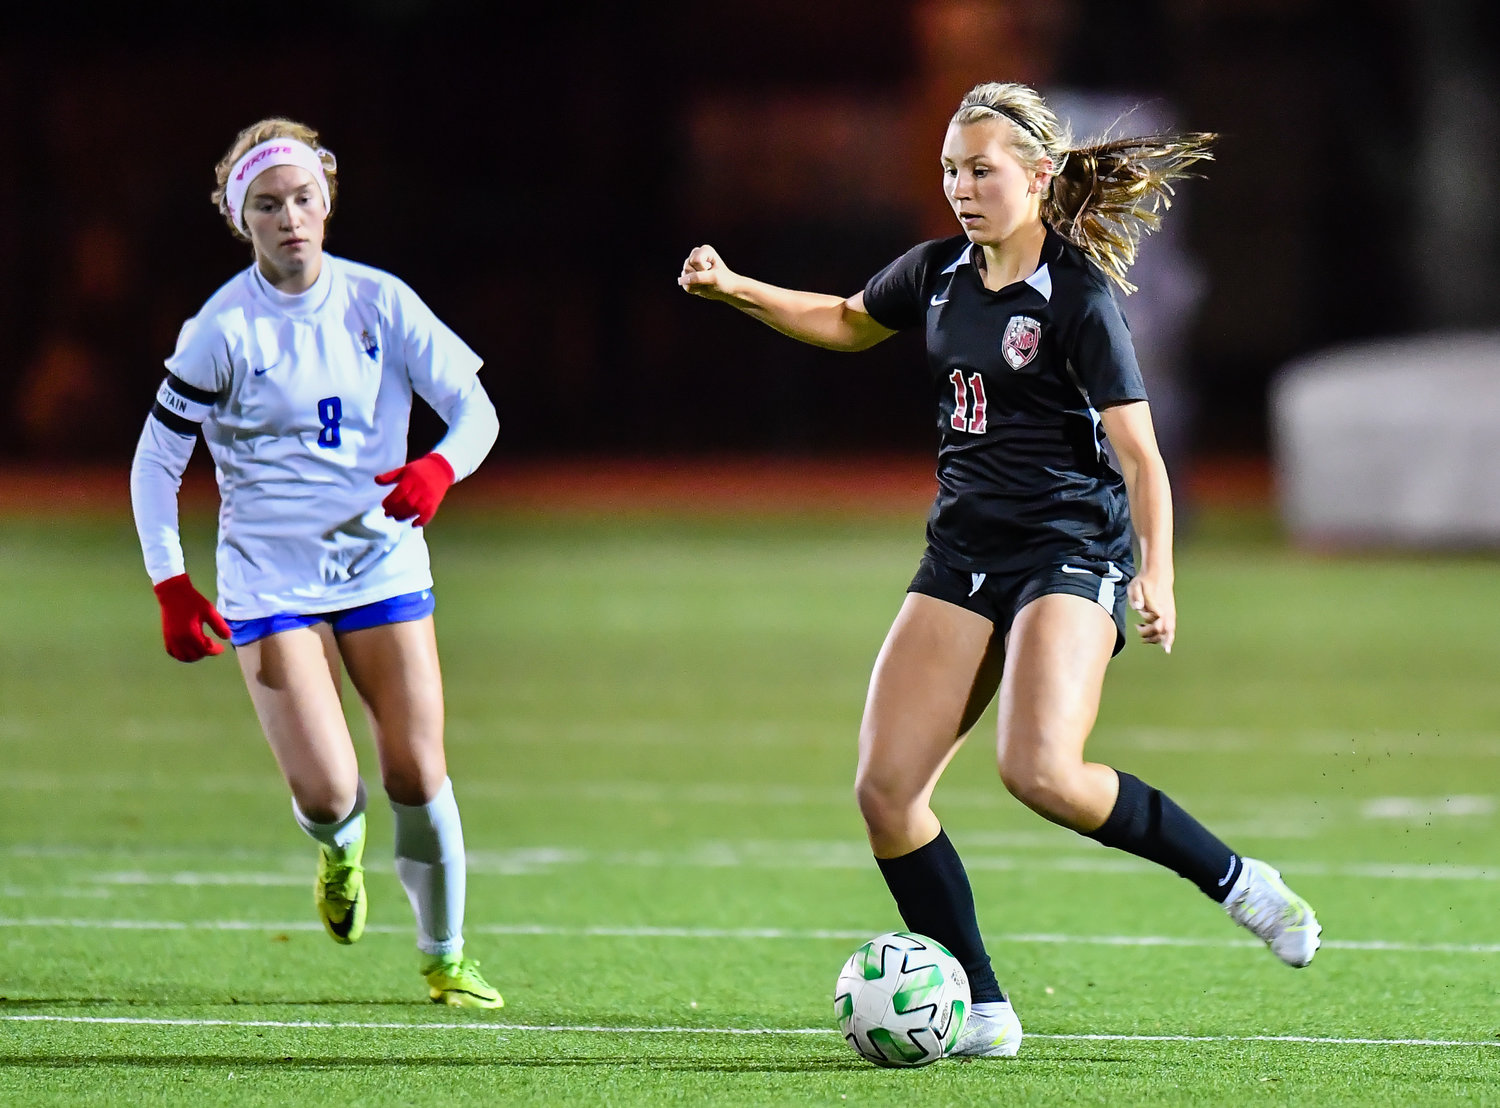 March 8, 2022: Katy's Hannah Phillips #11 passes the ball off during the Katy vs Katy Taylor soccer match at KHS. (Photo by Mark Goodman / Katy Times)